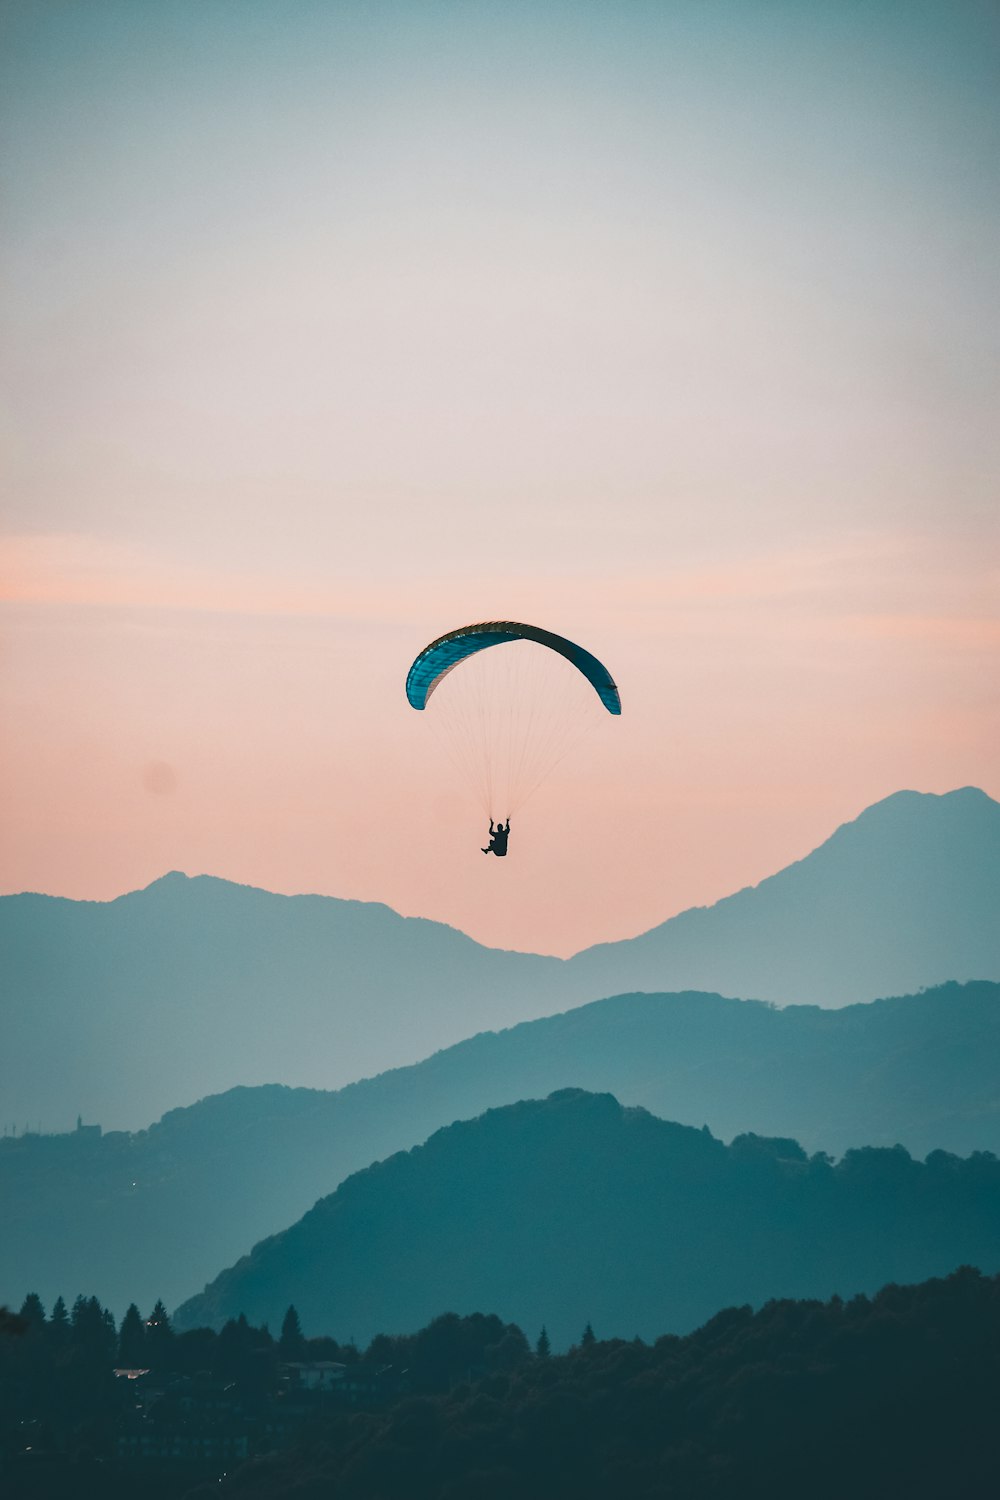 a person parasailing over a mountain range at sunset